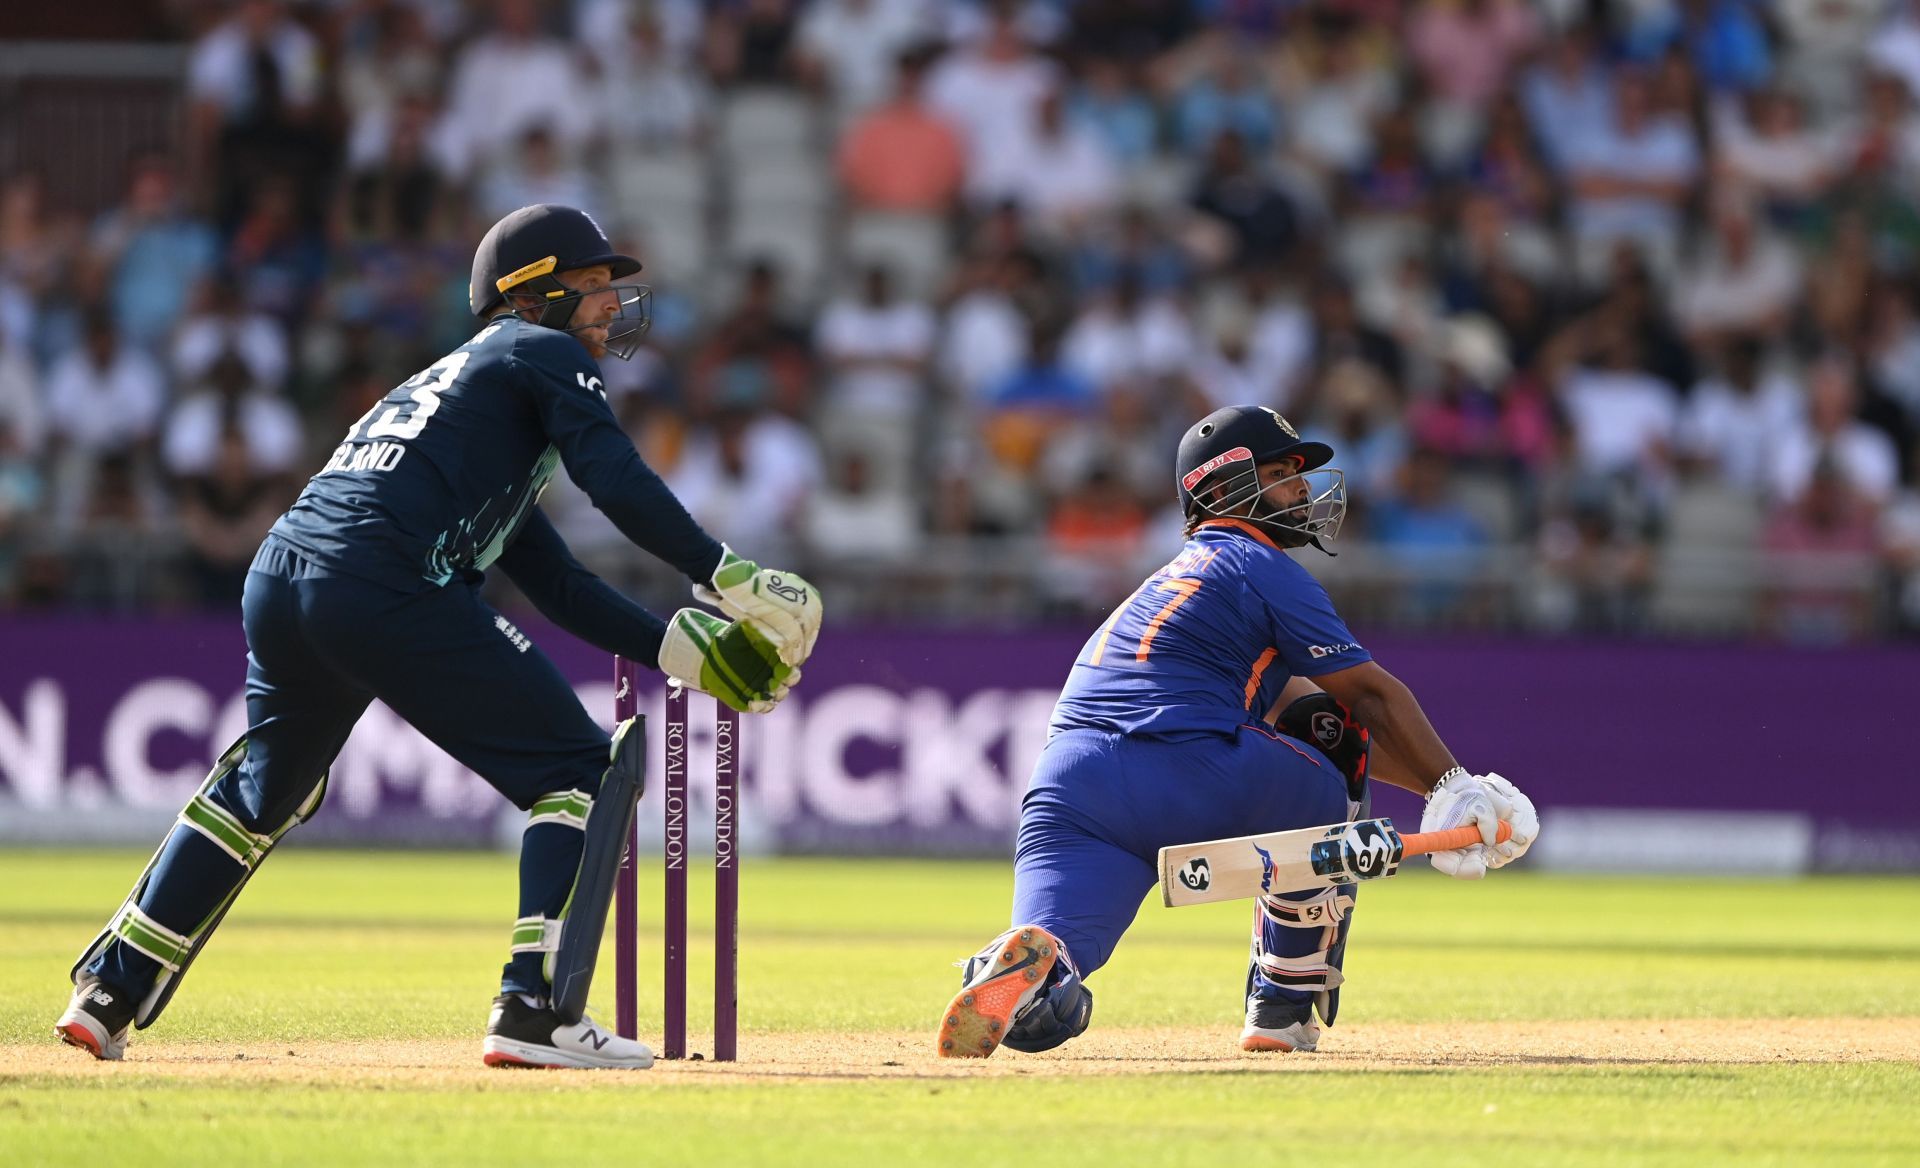 Rishabh Pant will not be a part of the ODI series against the West Indies cricket team. (Image: Getty)